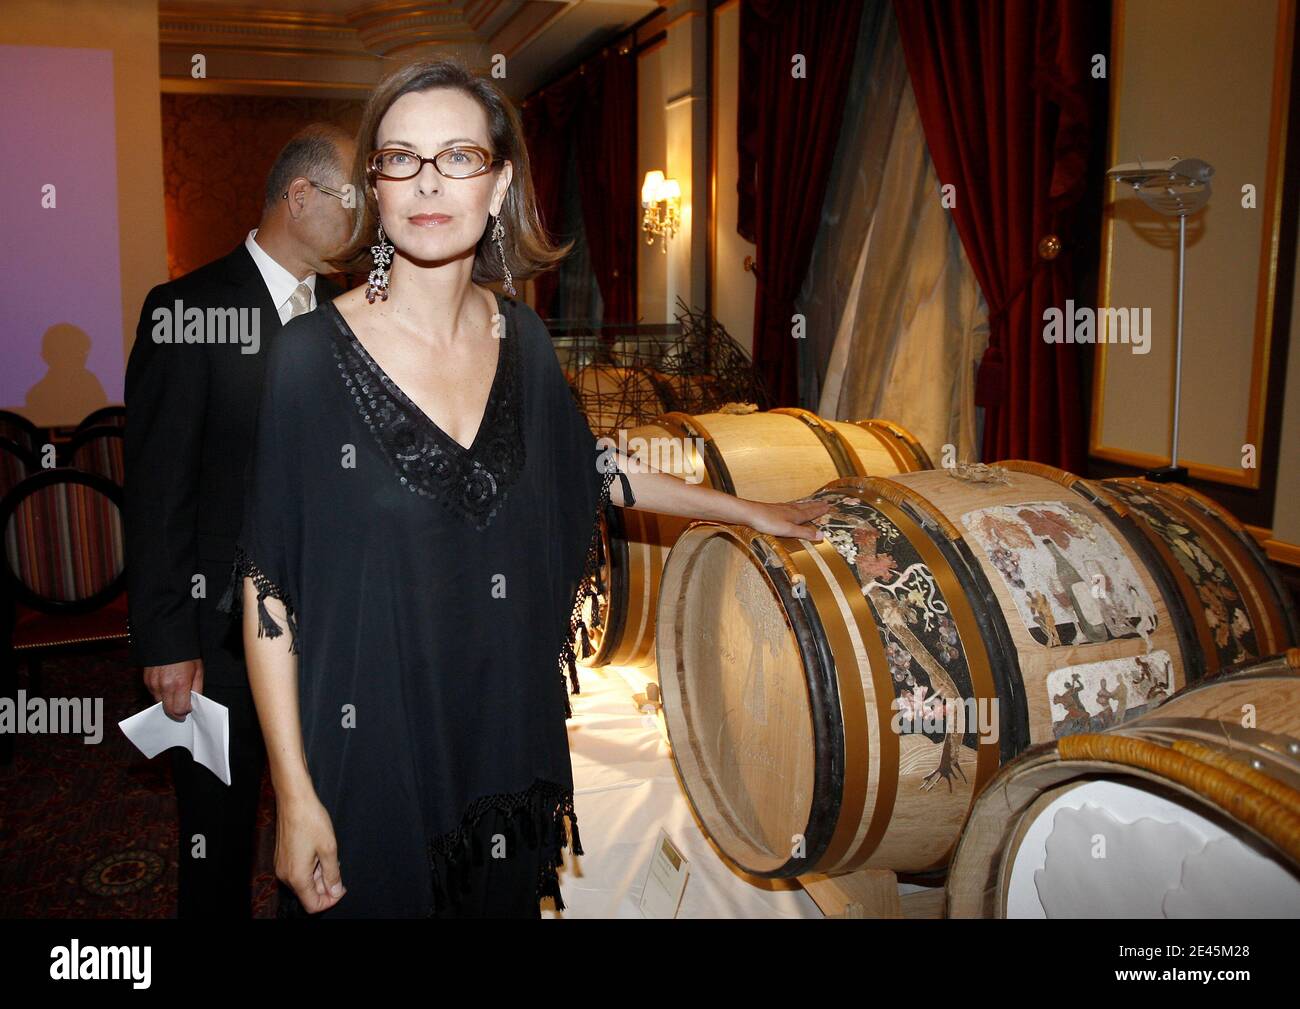 French Actress Carole Bouquet attends an wine auction to benefit charity association 'La voix de l'enfant' (The Child's Voice), in Bordeaux, southwestern France on June 2, 2009. Ten barrels manufactured from a 340-year-old oak and personalized by artists have been auctioned. Bouquet is the association's spokesperson. Photo by Patrick Bernard/ABACAPRESS.COM Stock Photo